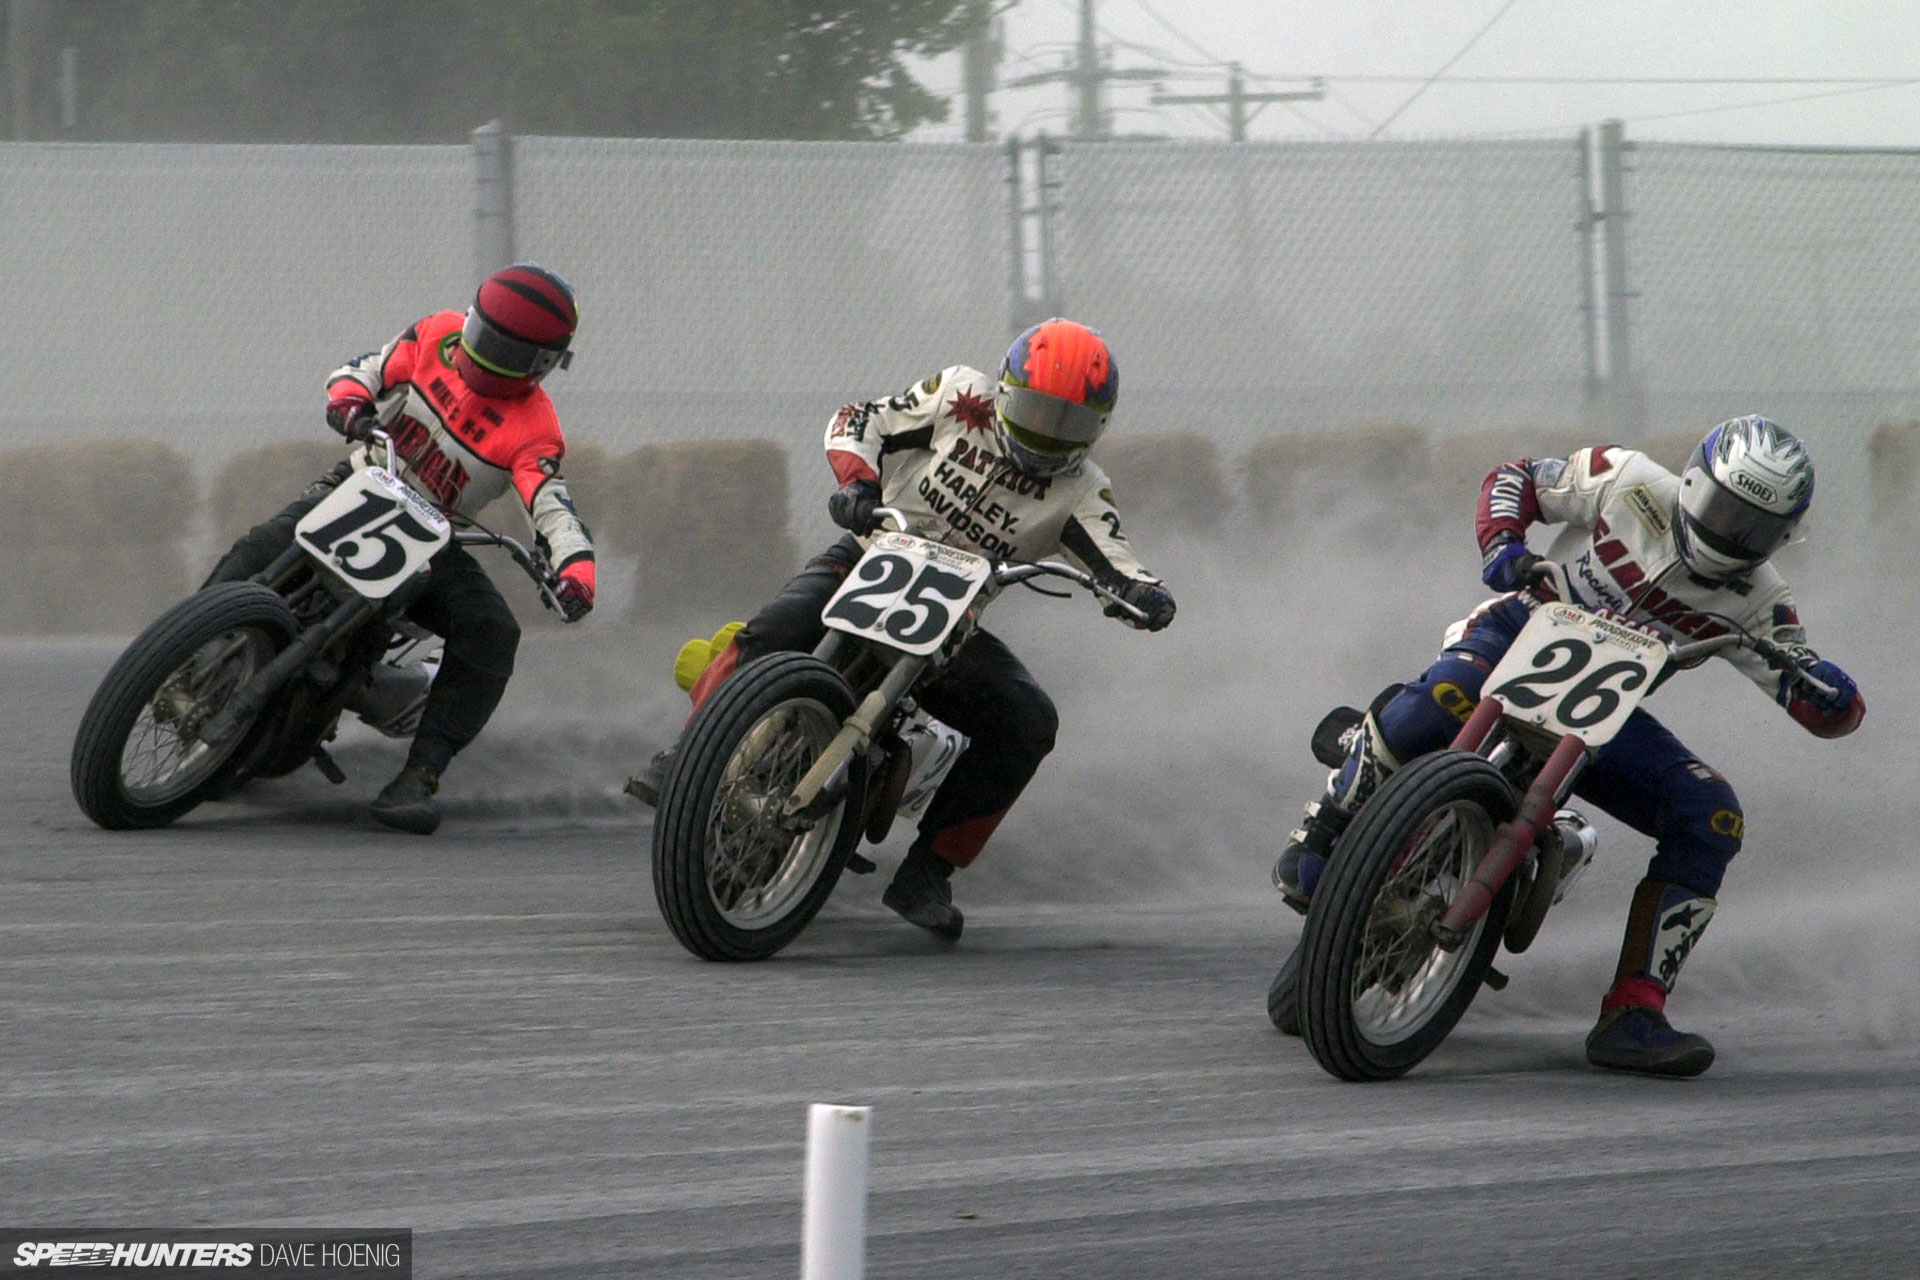 140mph & No Front Brakes The American Flat Track Backstory Speedhunters